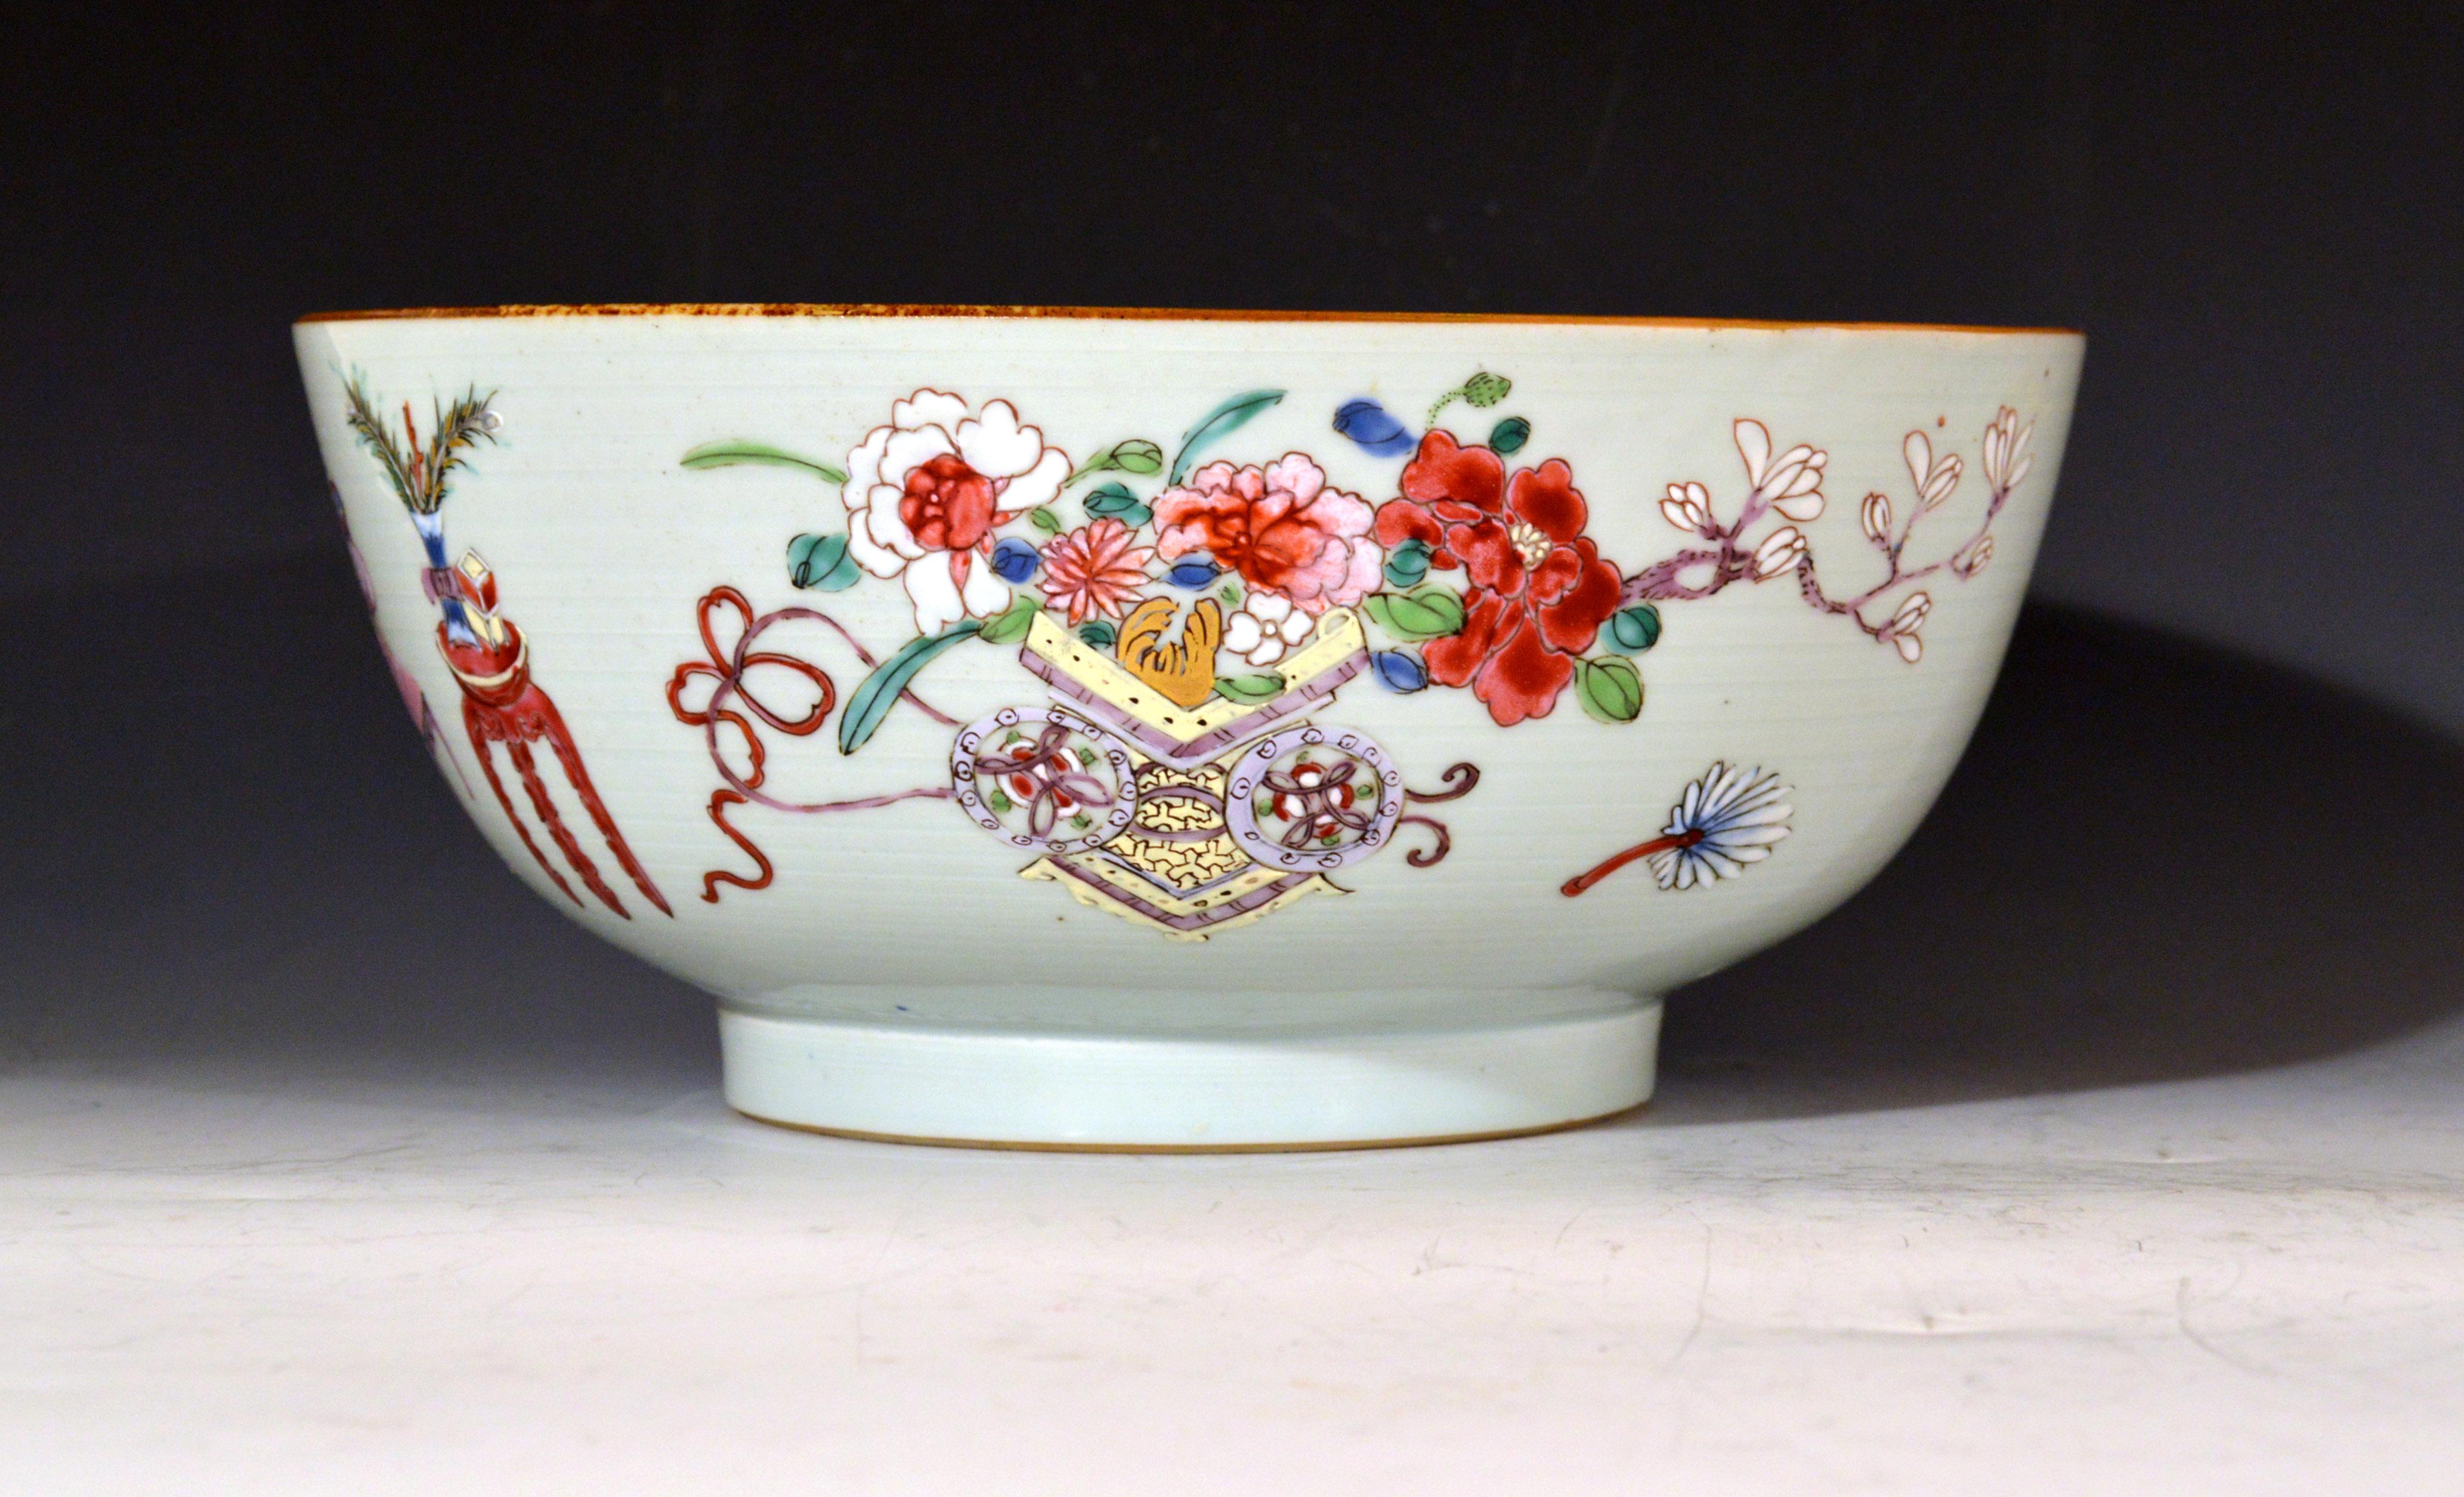 18th Century Chinese Export Porcelain Bowl with Chinese Domestic Furniture In Good Condition For Sale In Downingtown, PA